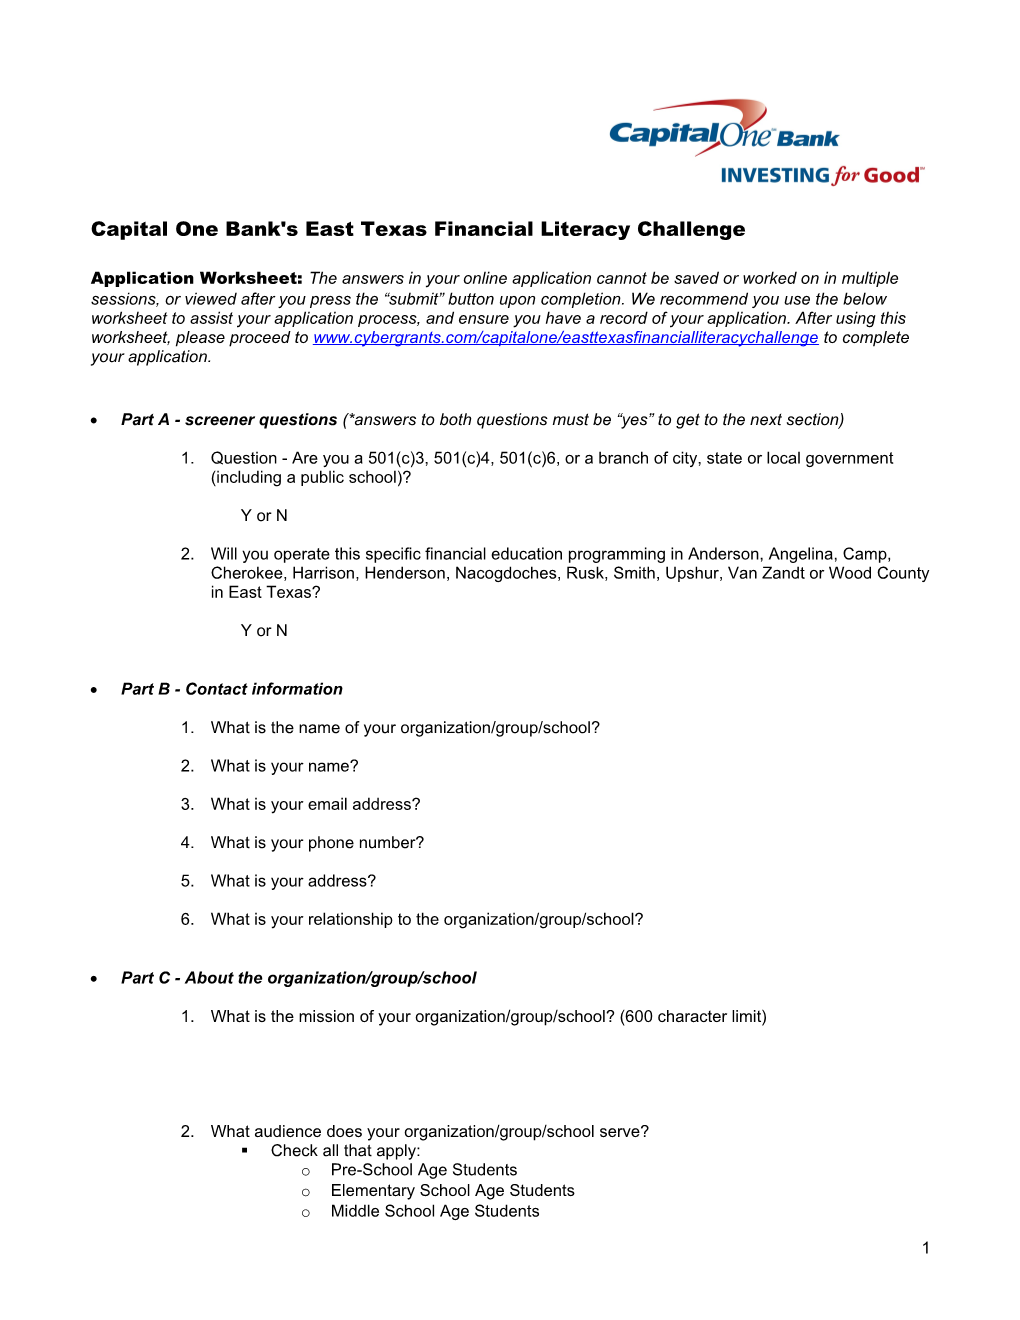 Capital One Bank's East Texas Financial Literacy Challenge